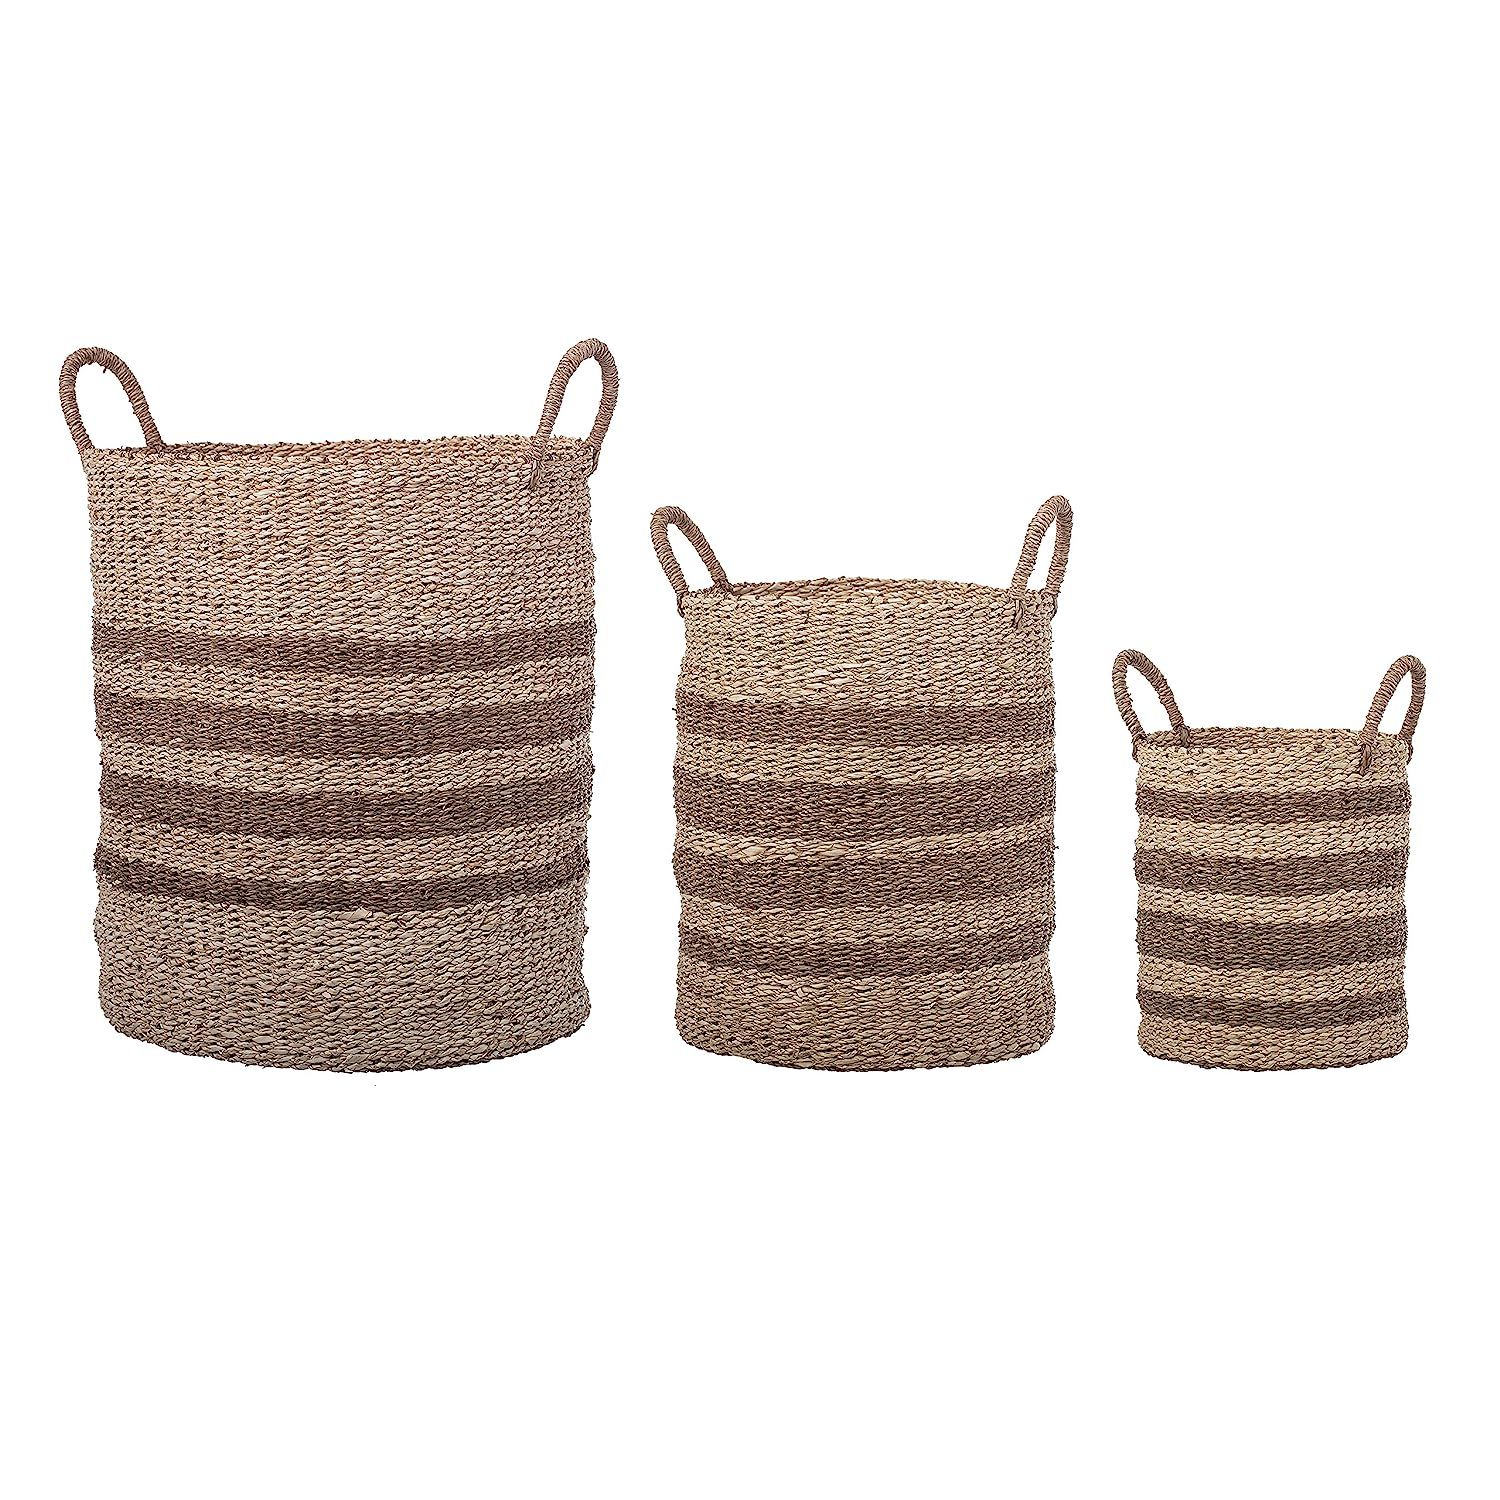 Bloomingville Striped Seagrass & Palm Baskets (Set of 3), 3 Piece | Amazon (US)